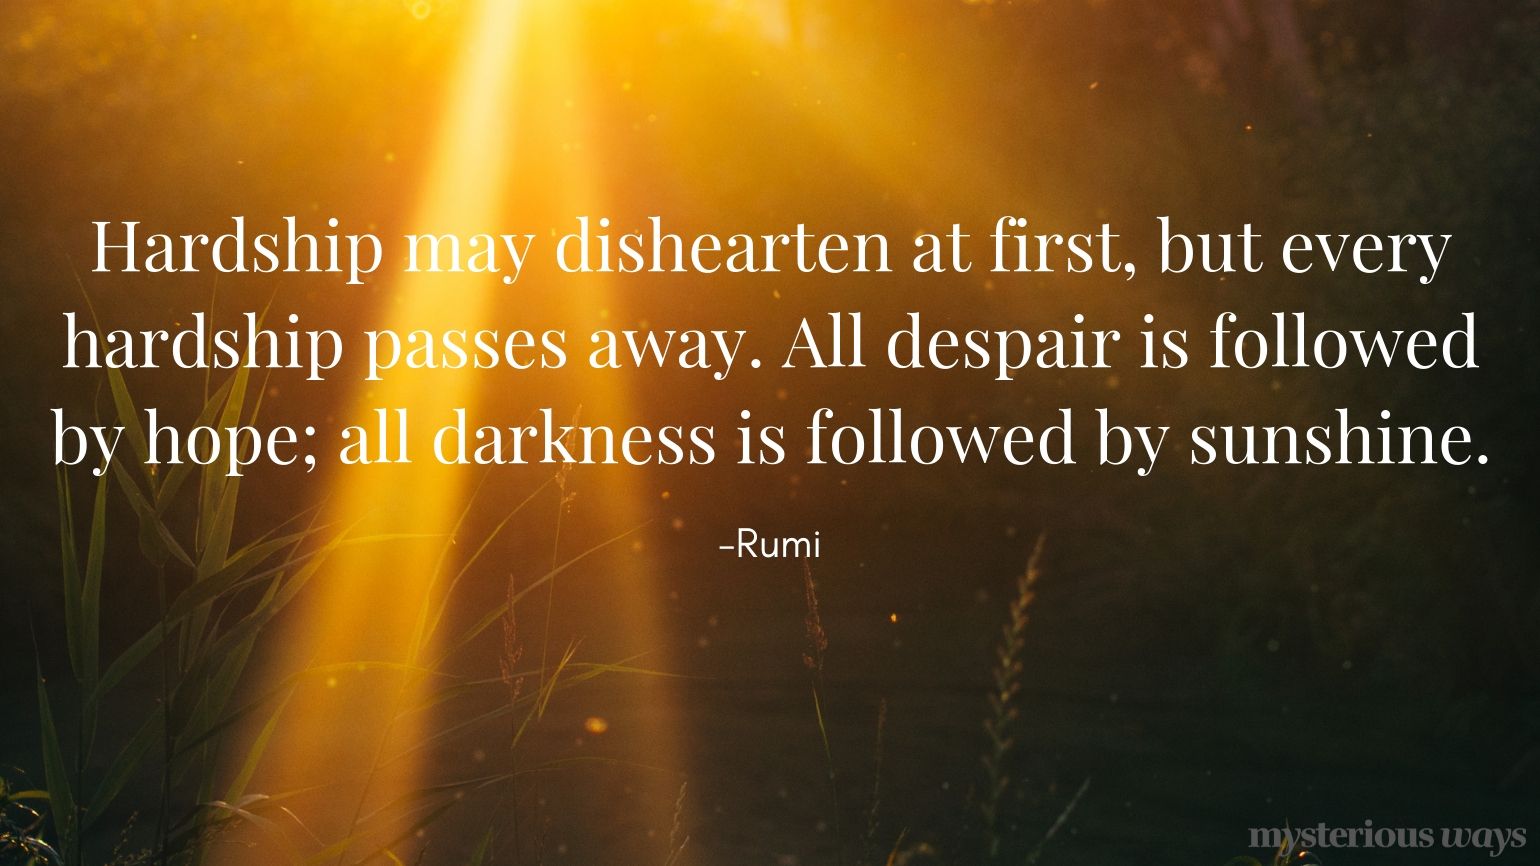 Hardship may dishearten at first, but every hardship passes away. All despair is followed by hope; all darkness is followed by sunshine. —Rumi